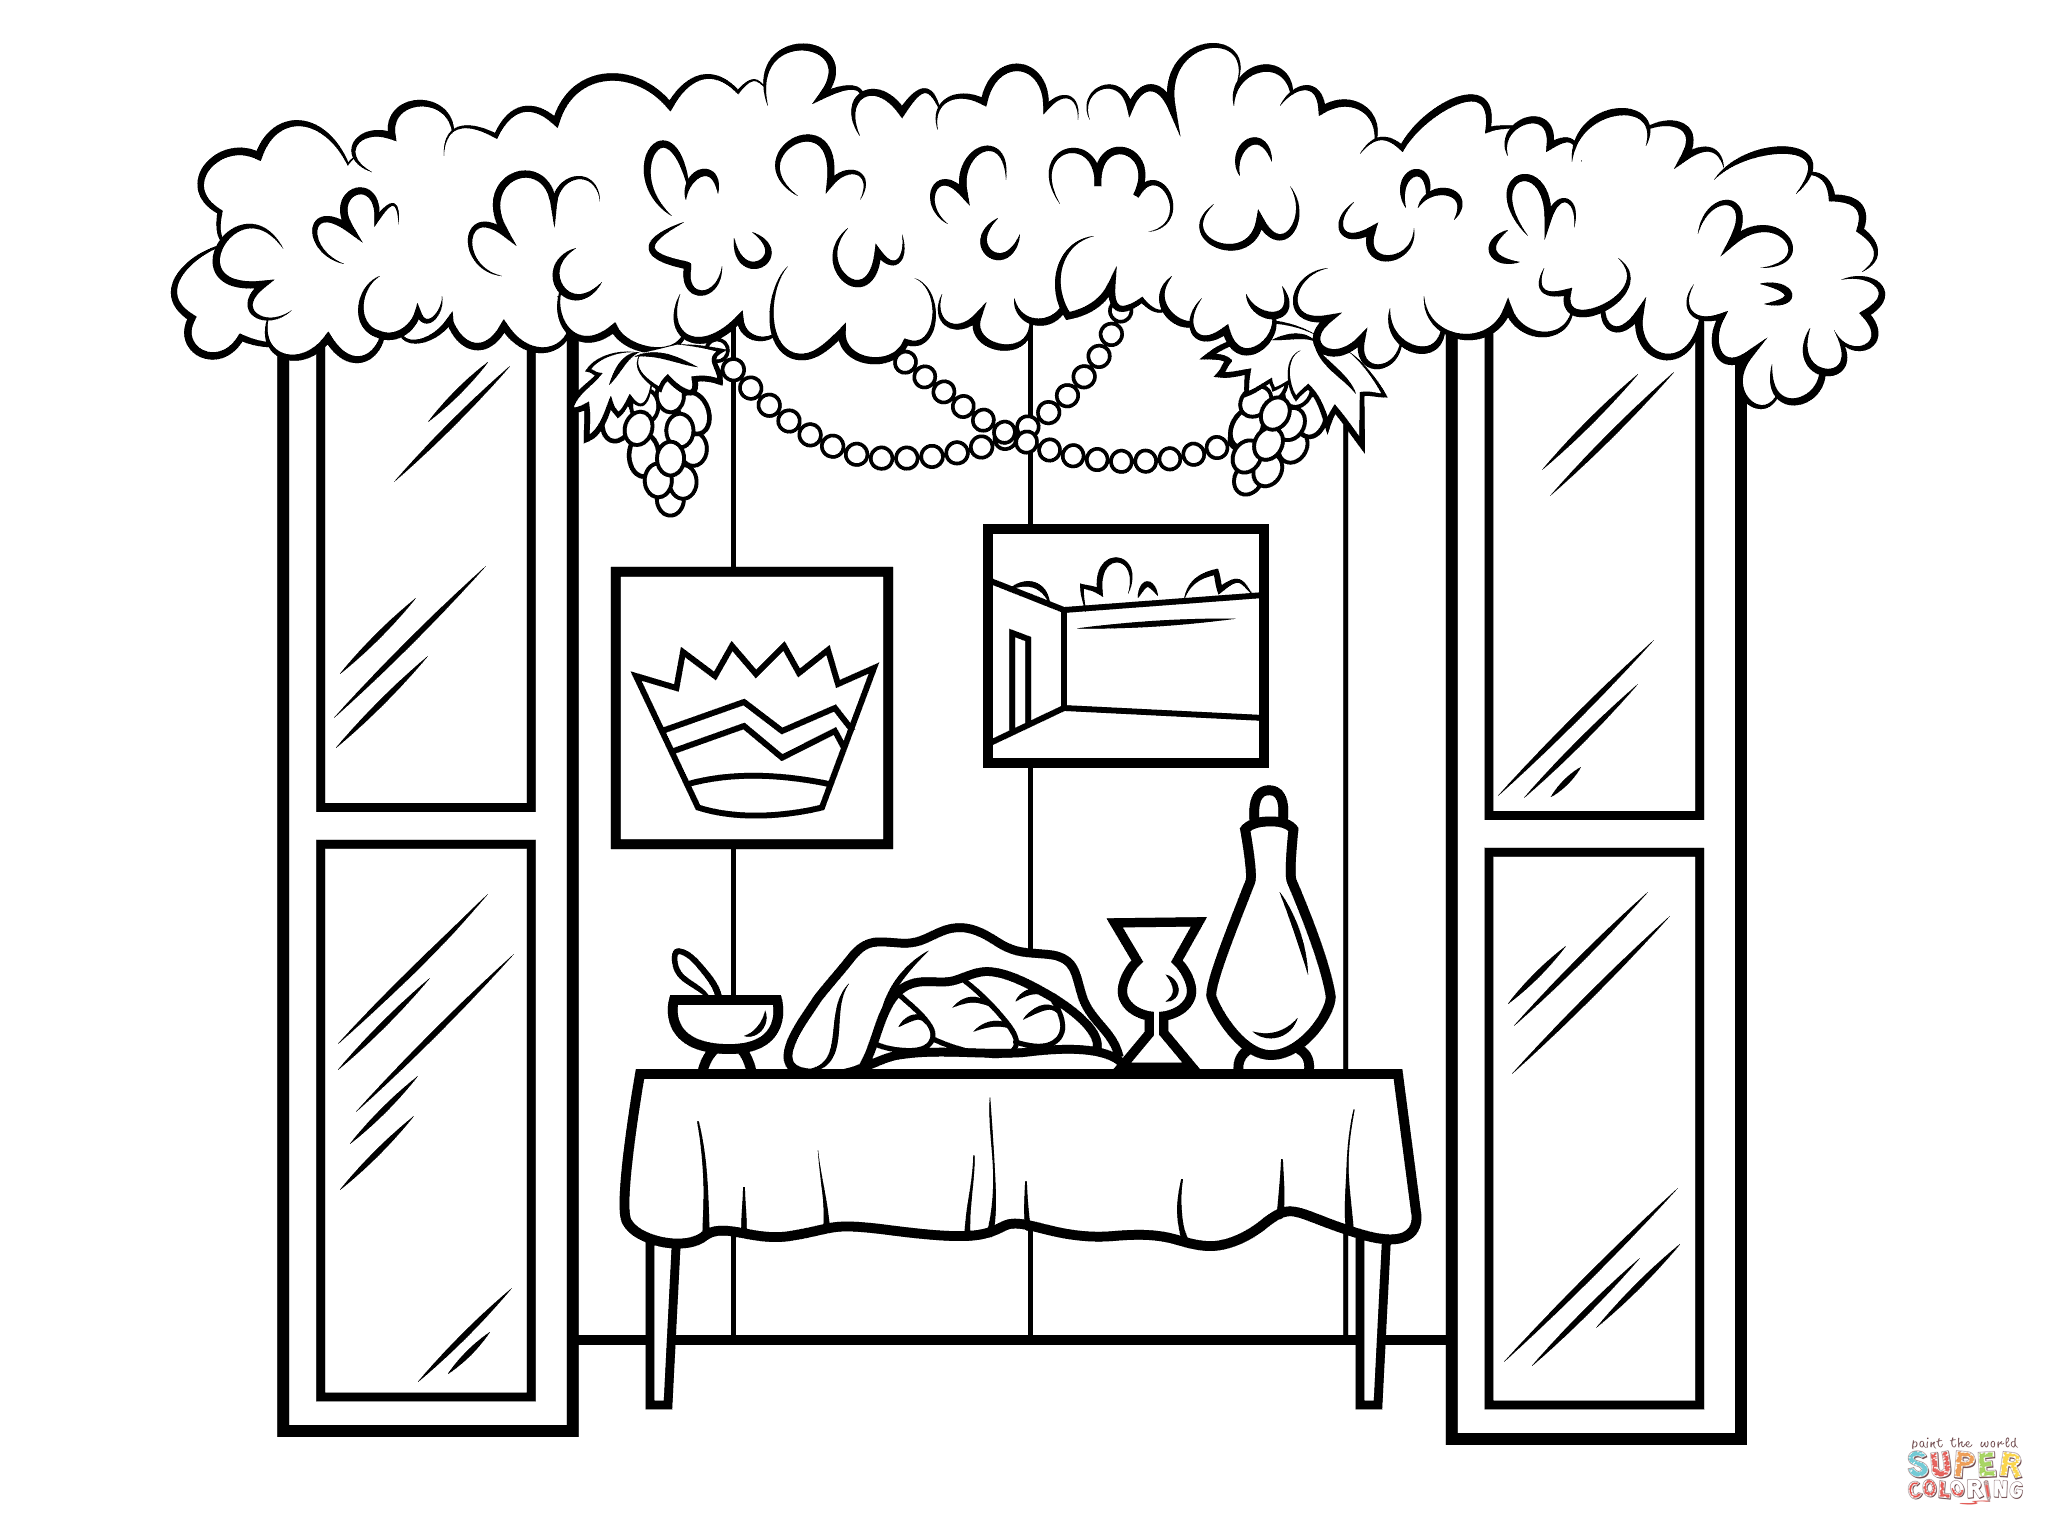 Sukkah for sukkot coloring page from sukkot category select from printable crafts of cartoons natureâ sukkot crafts sukkot free printable coloring pages